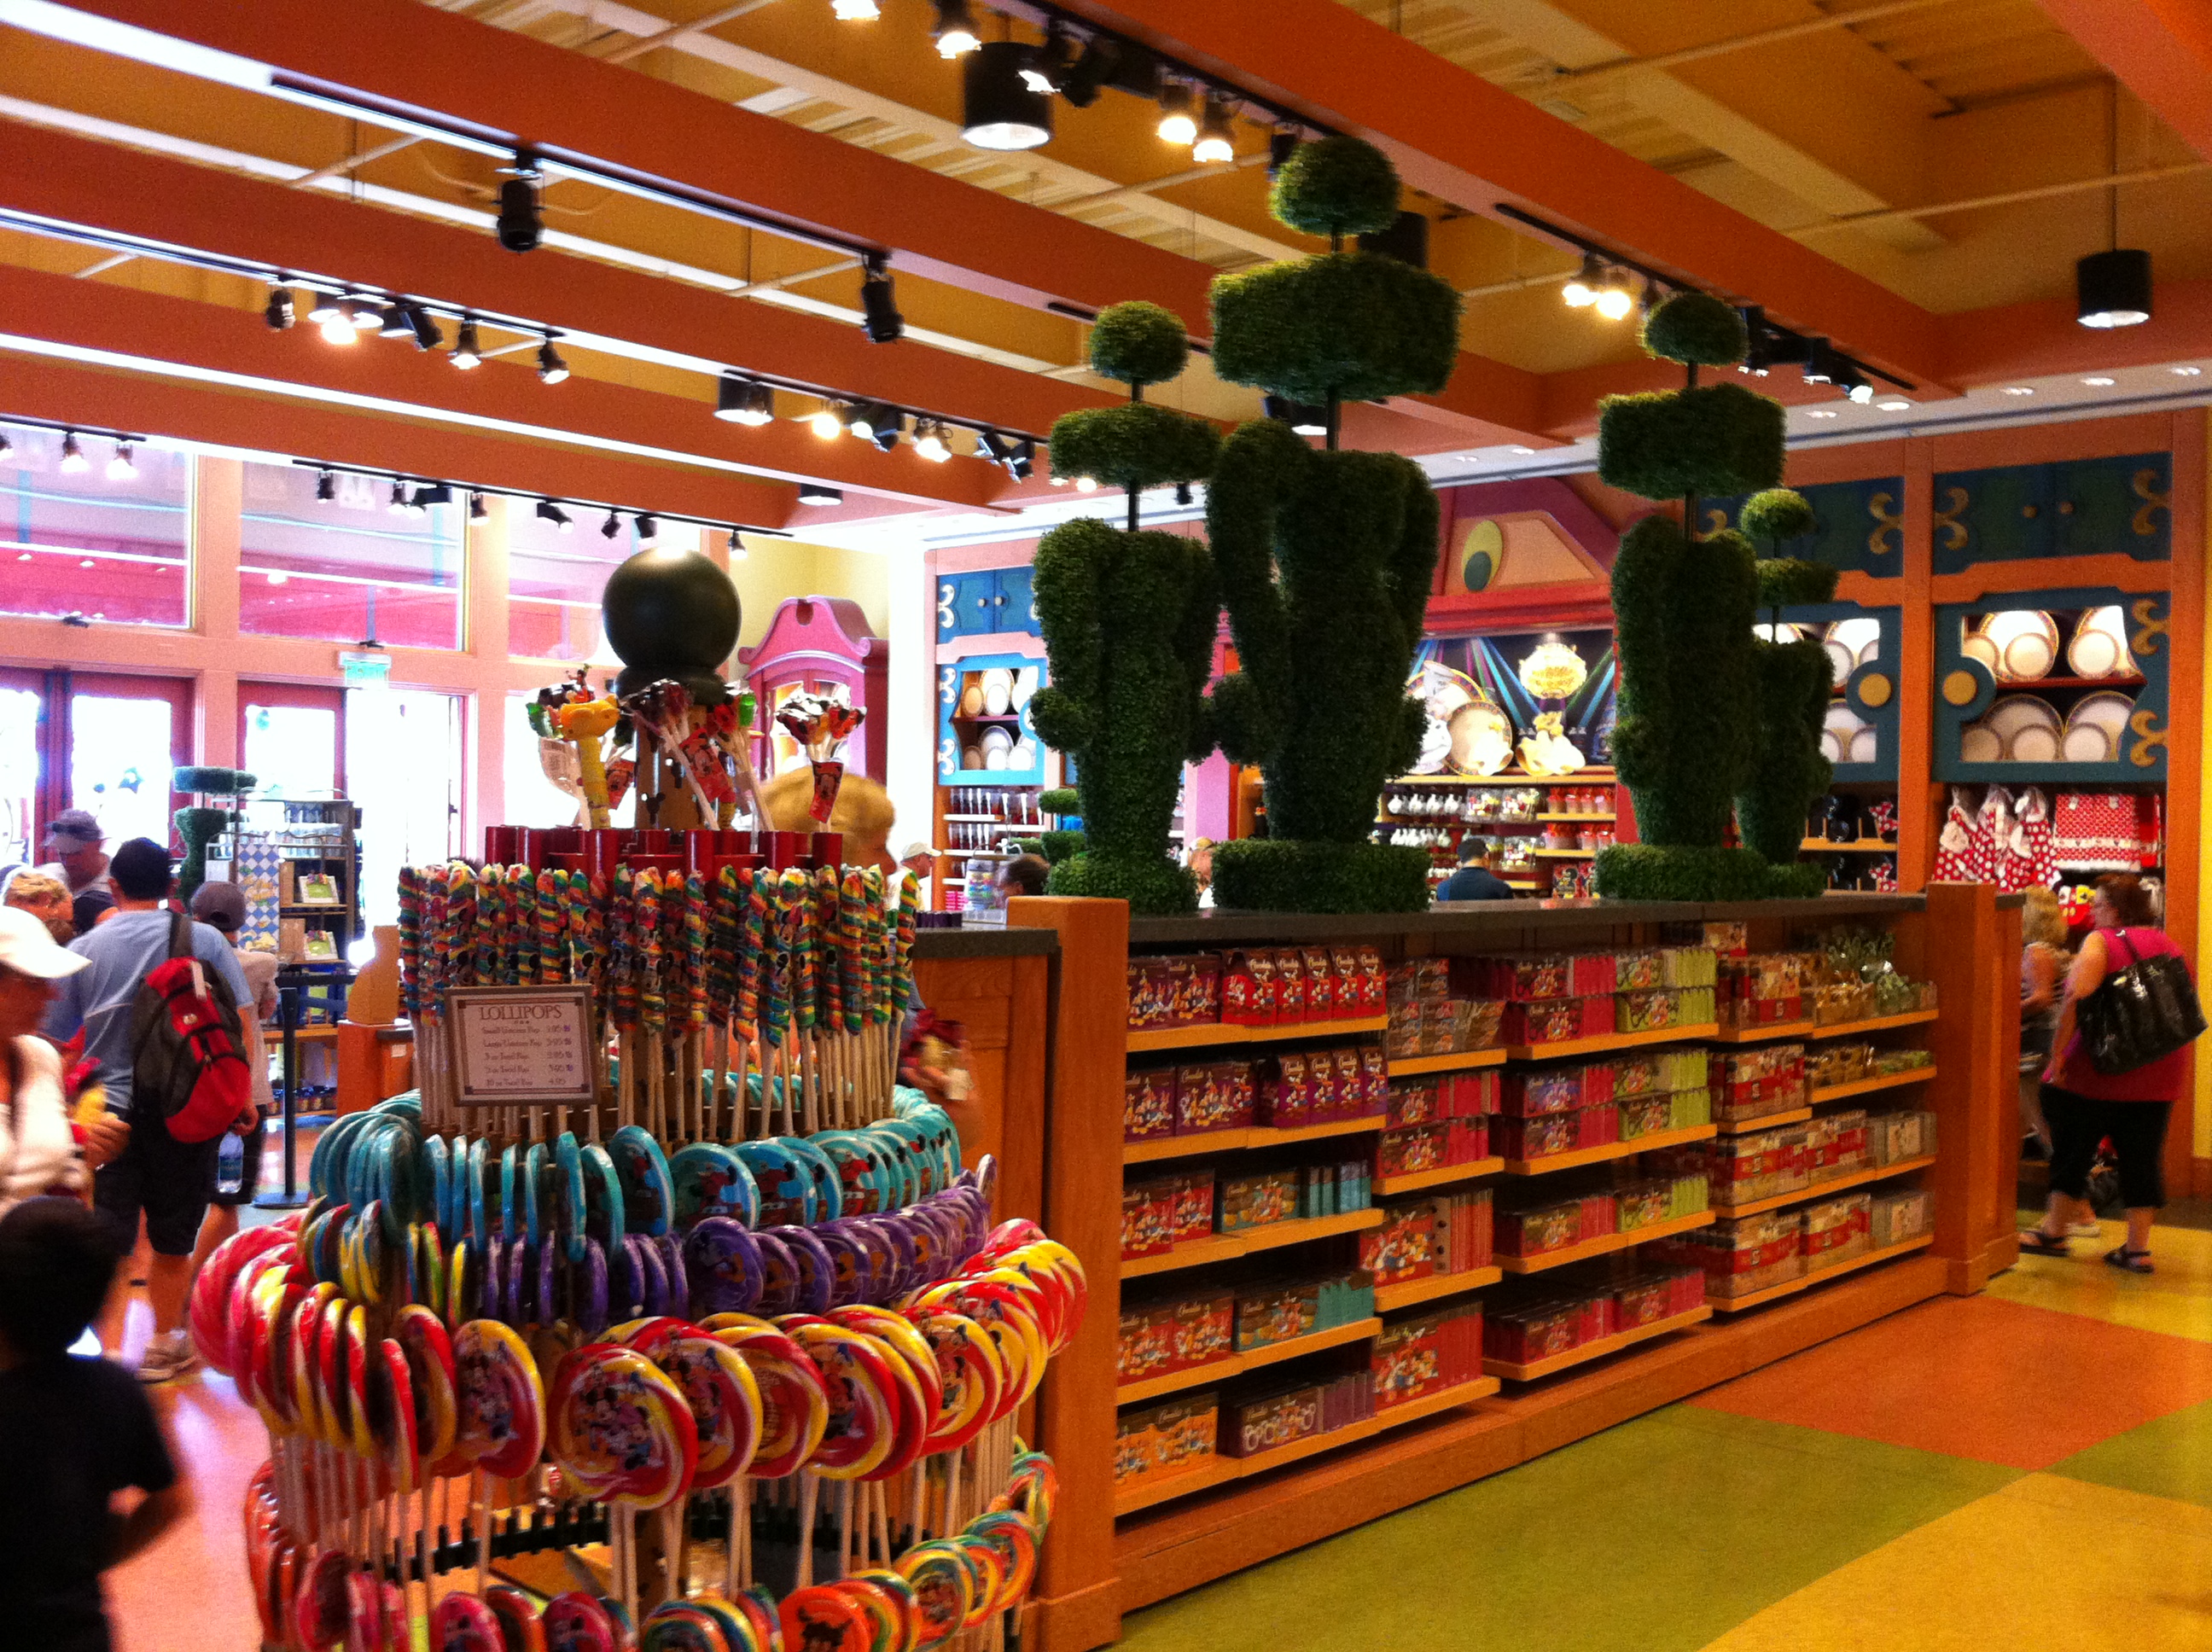 The World of Disney Kitchen and Candy Section